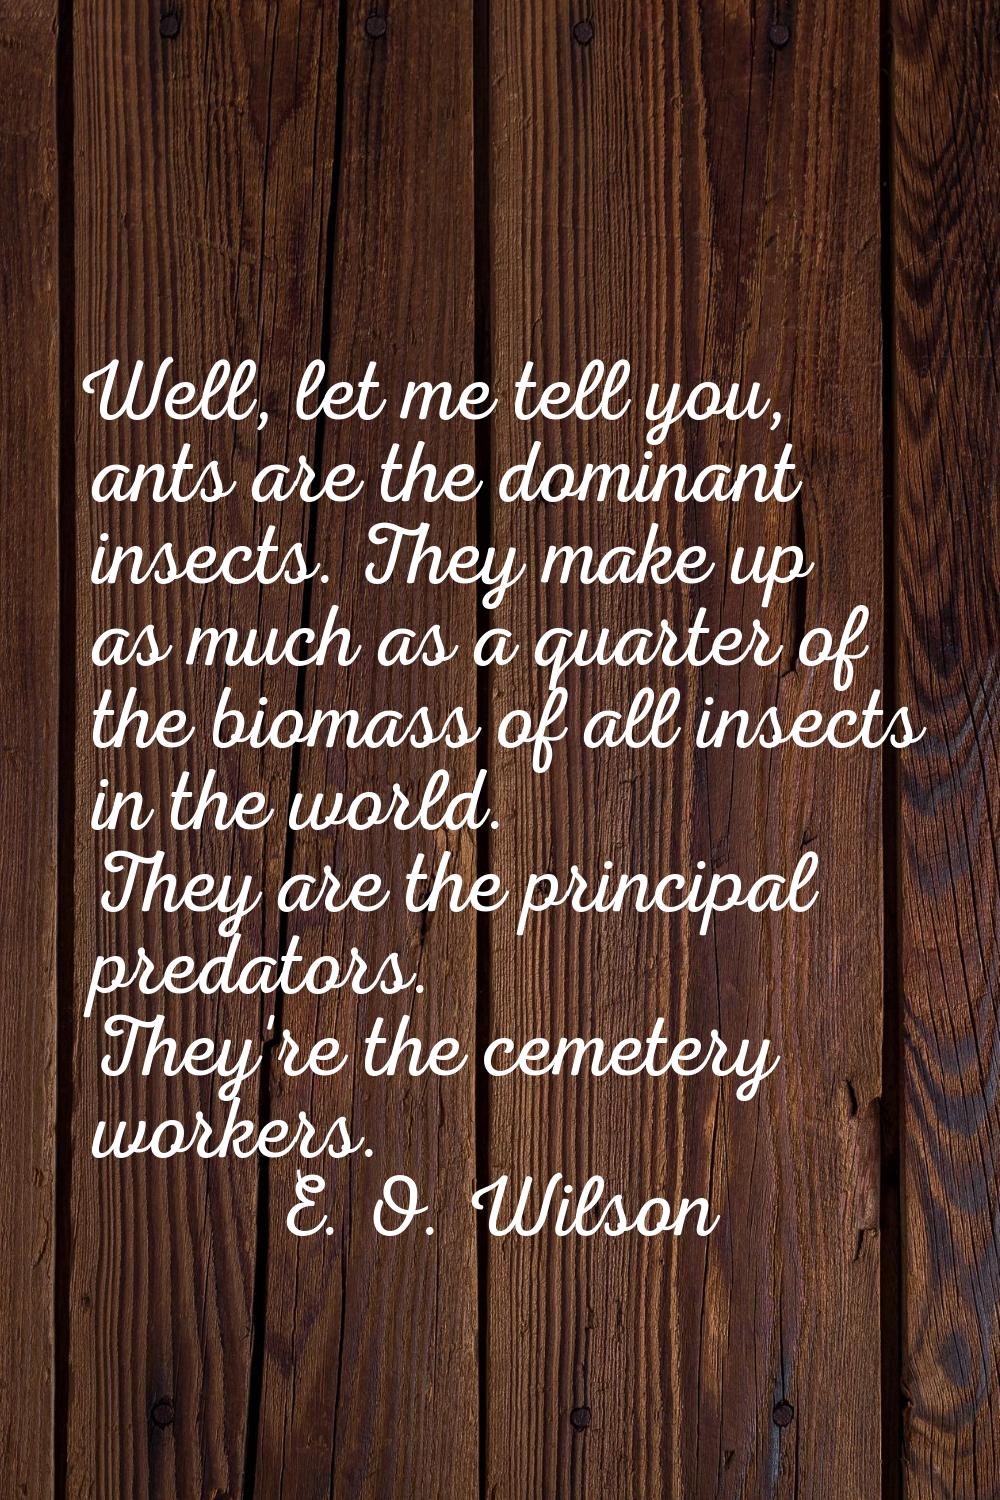 Well, let me tell you, ants are the dominant insects. They make up as much as a quarter of the biom